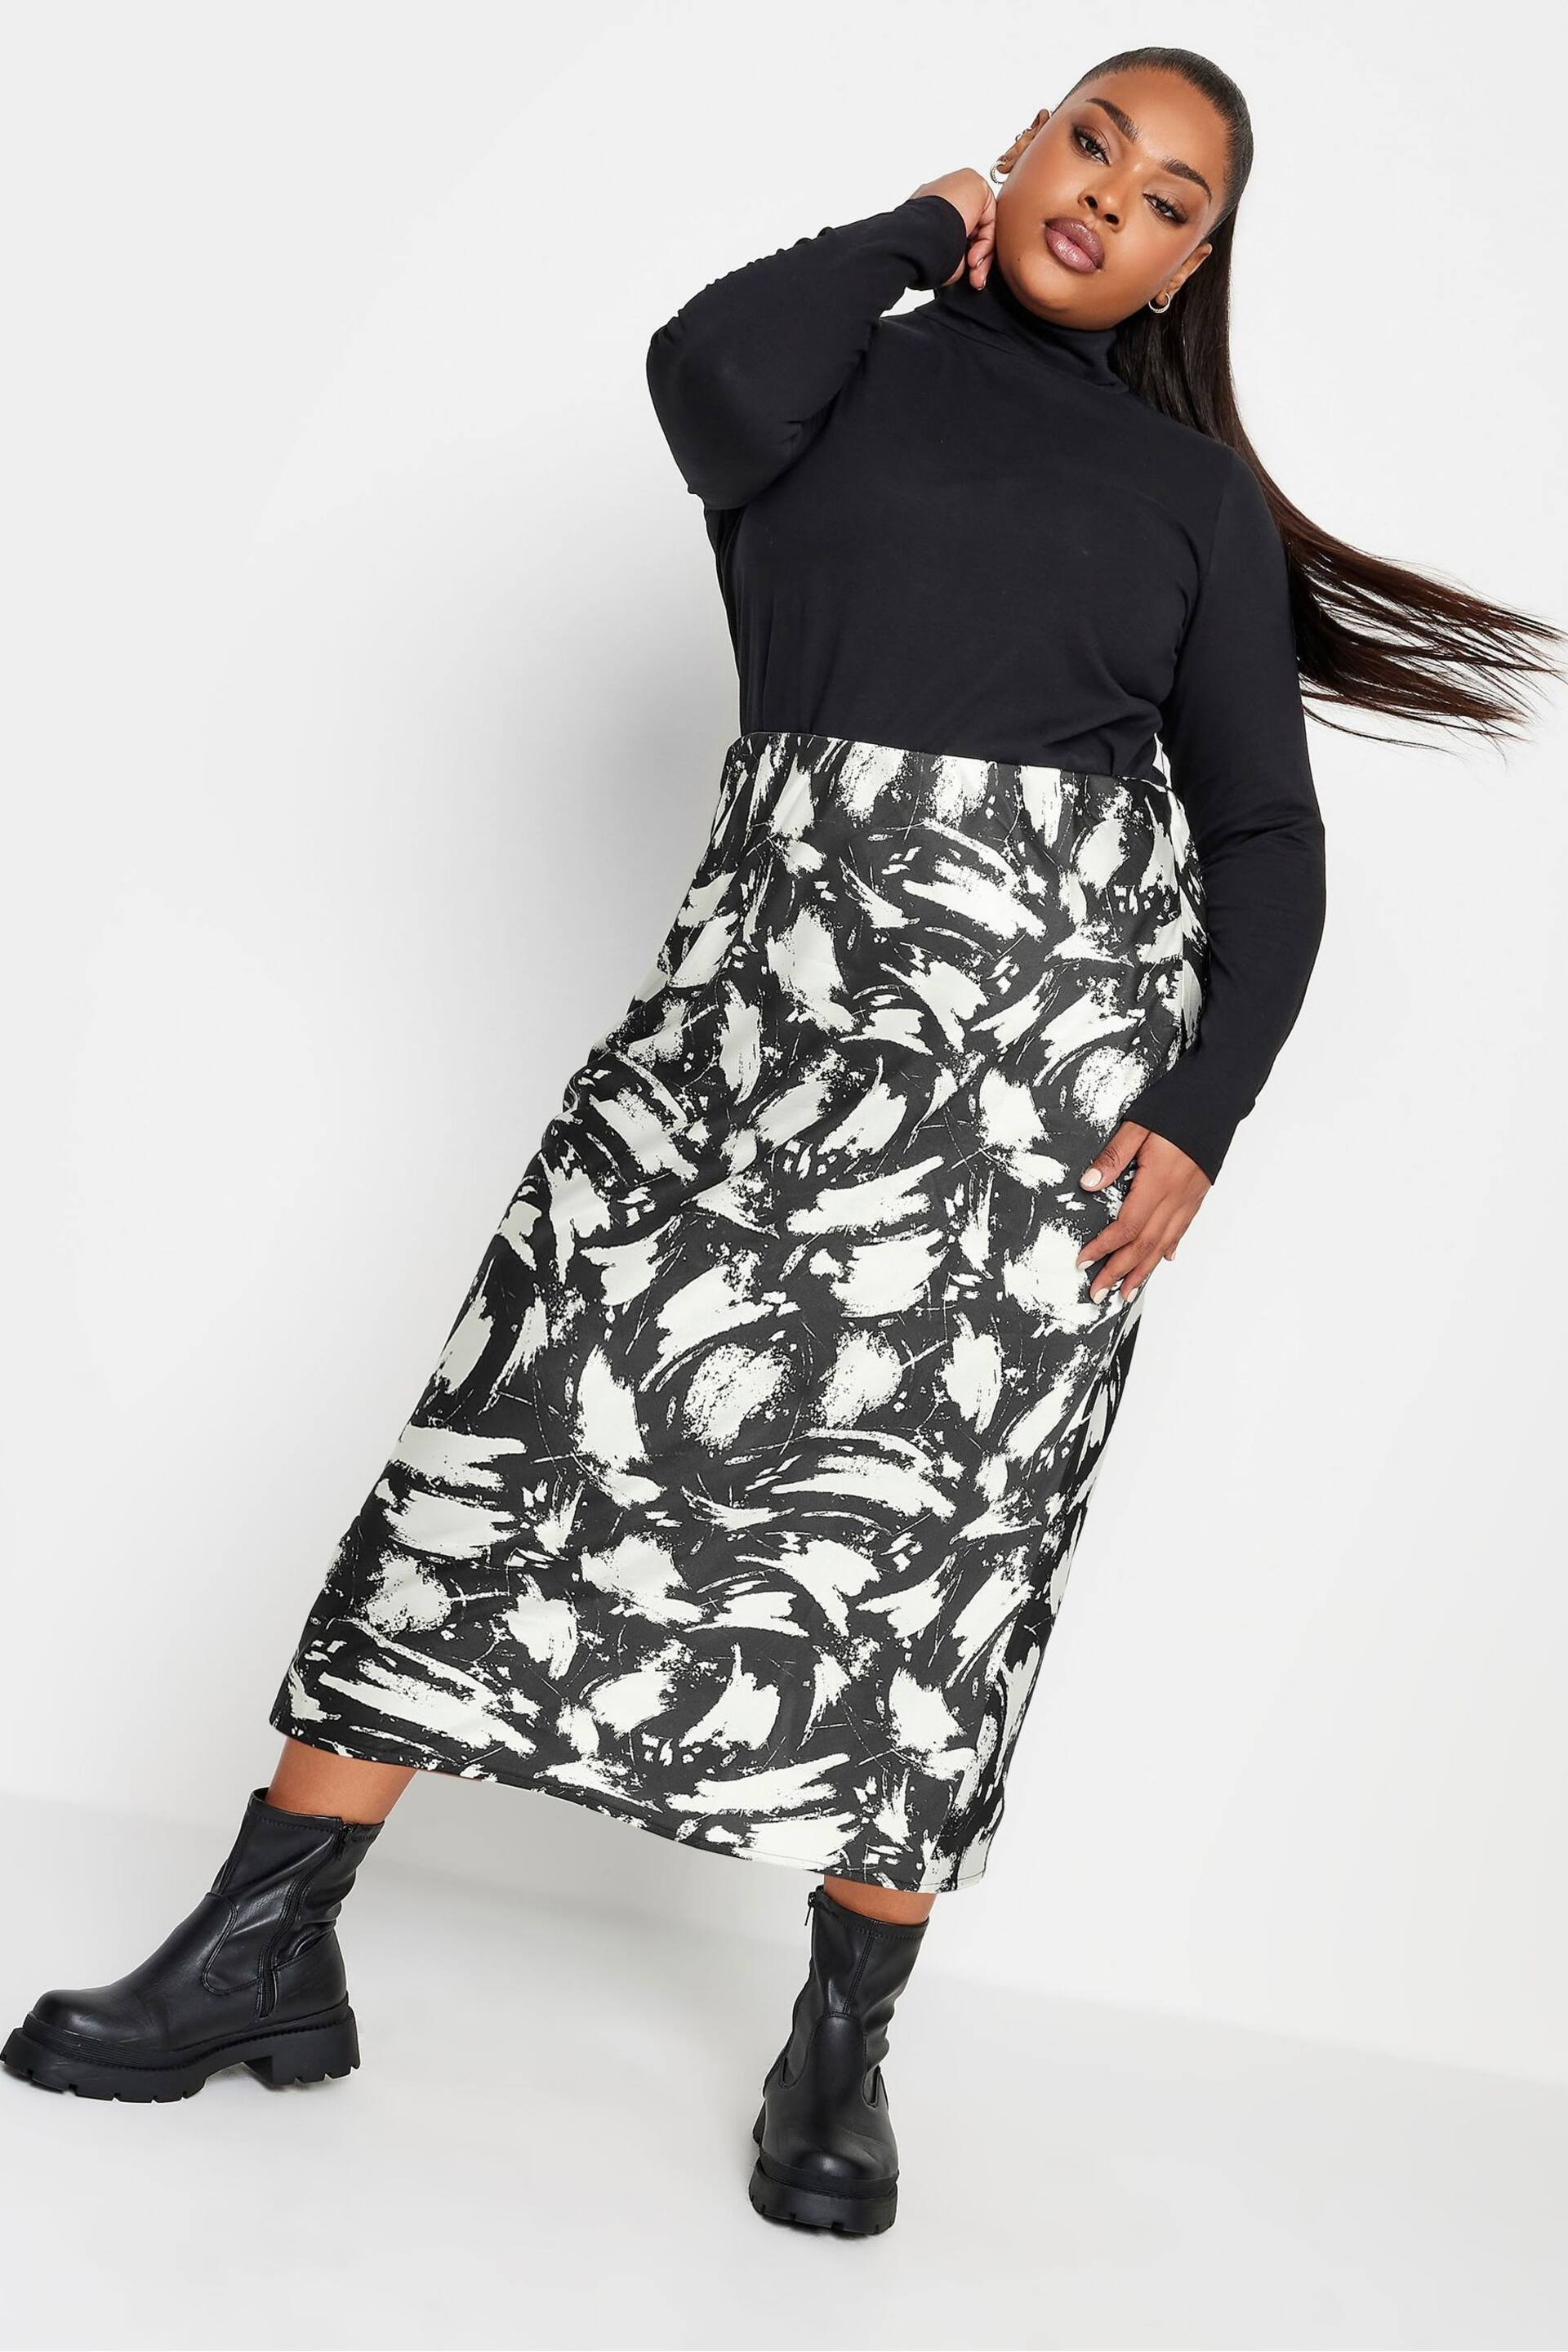 Yours Curve Black Bias Cut Skirt - Image 3 of 4